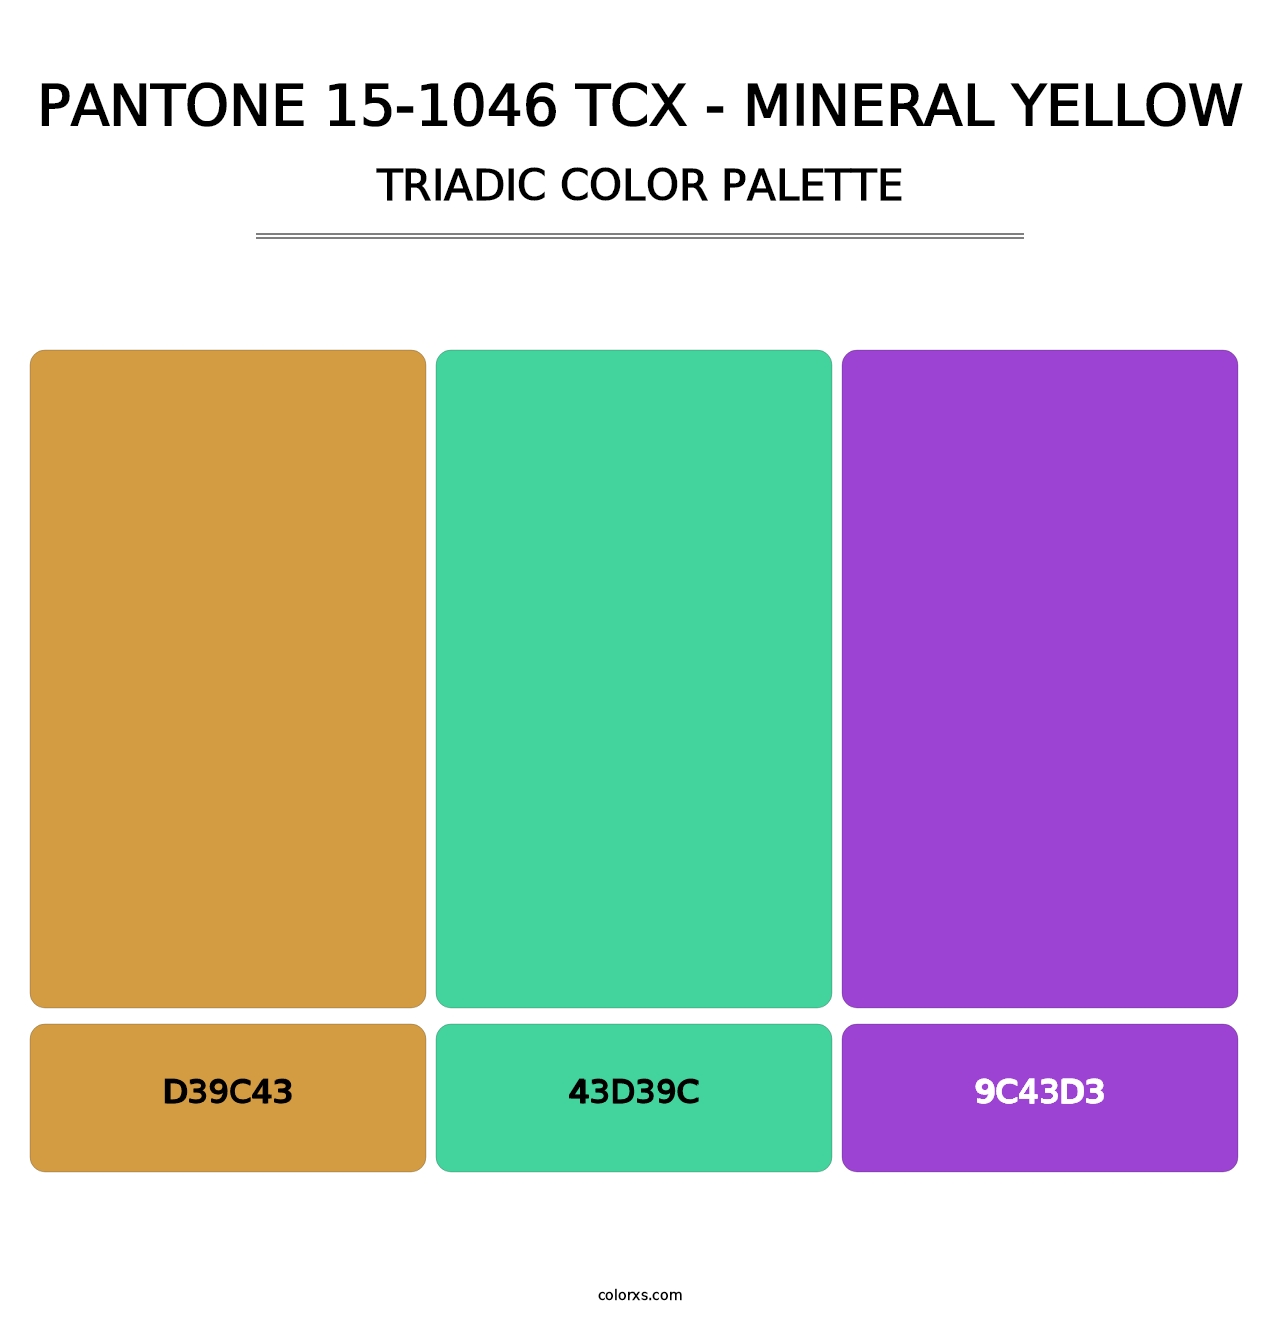 PANTONE 15-1046 TCX - Mineral Yellow - Triadic Color Palette